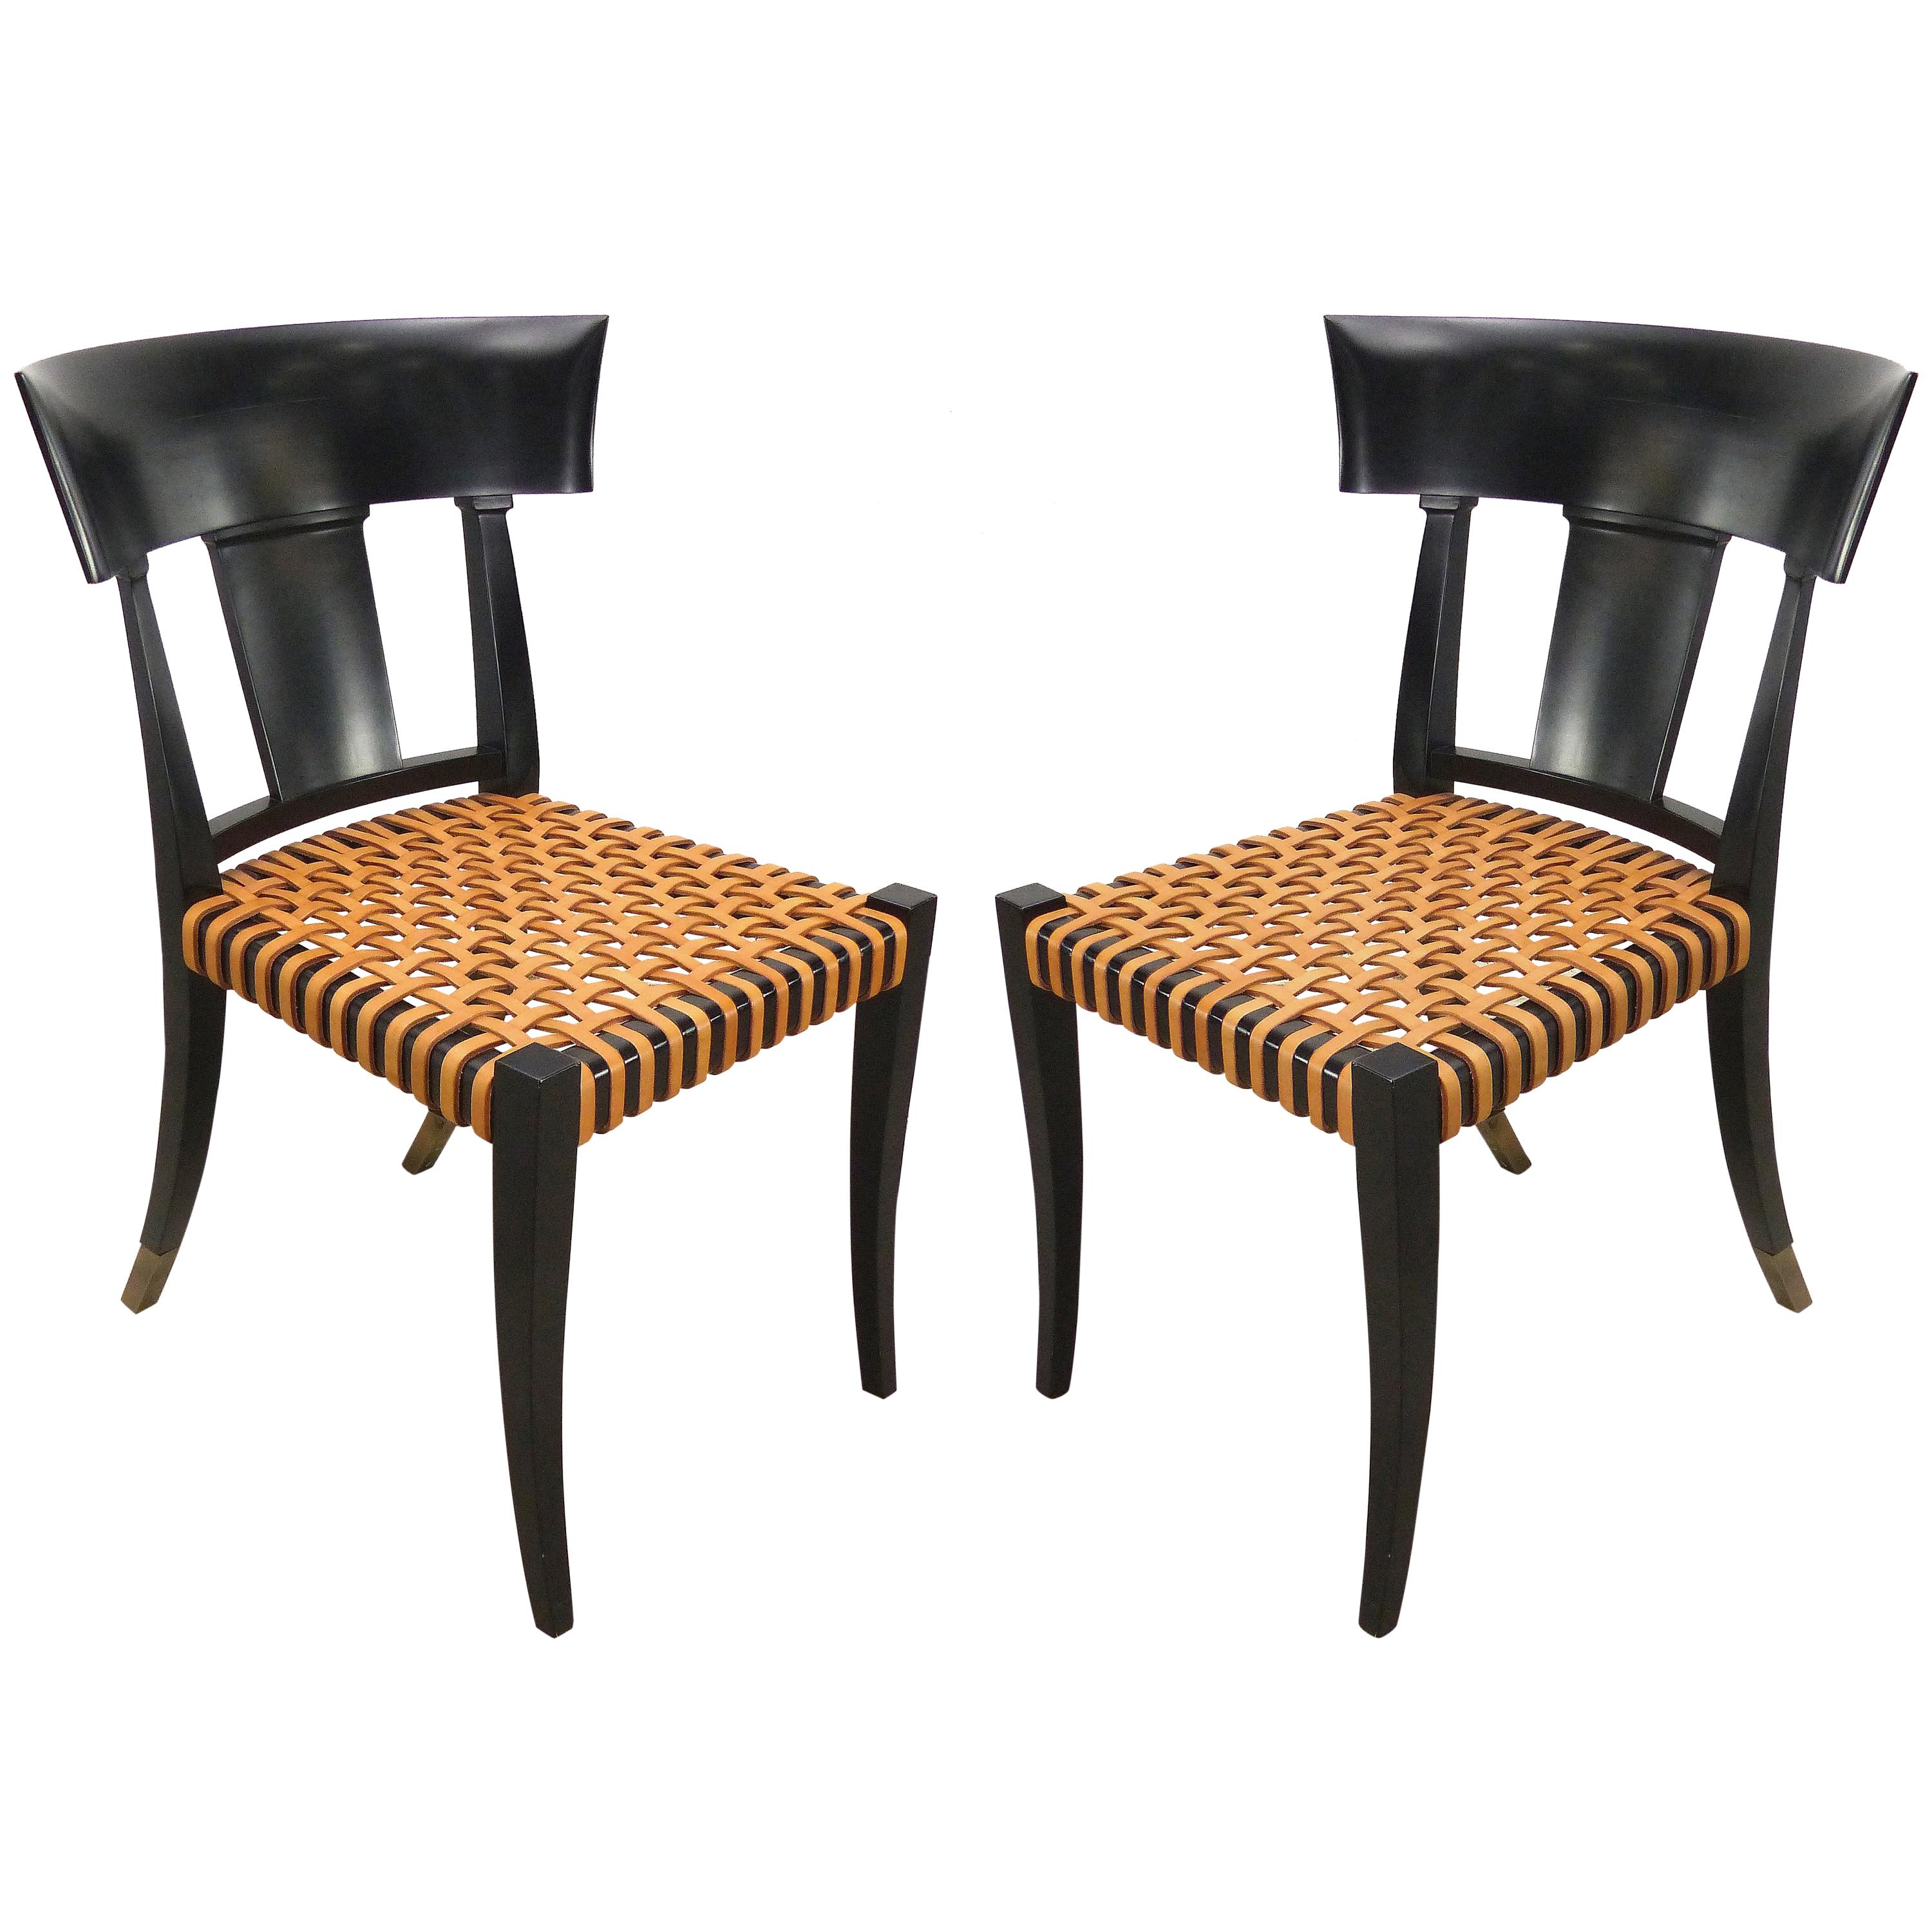 Luca Schacchetti Oak Design Edizoni Italy Lacquered Chairs with Woven Leather